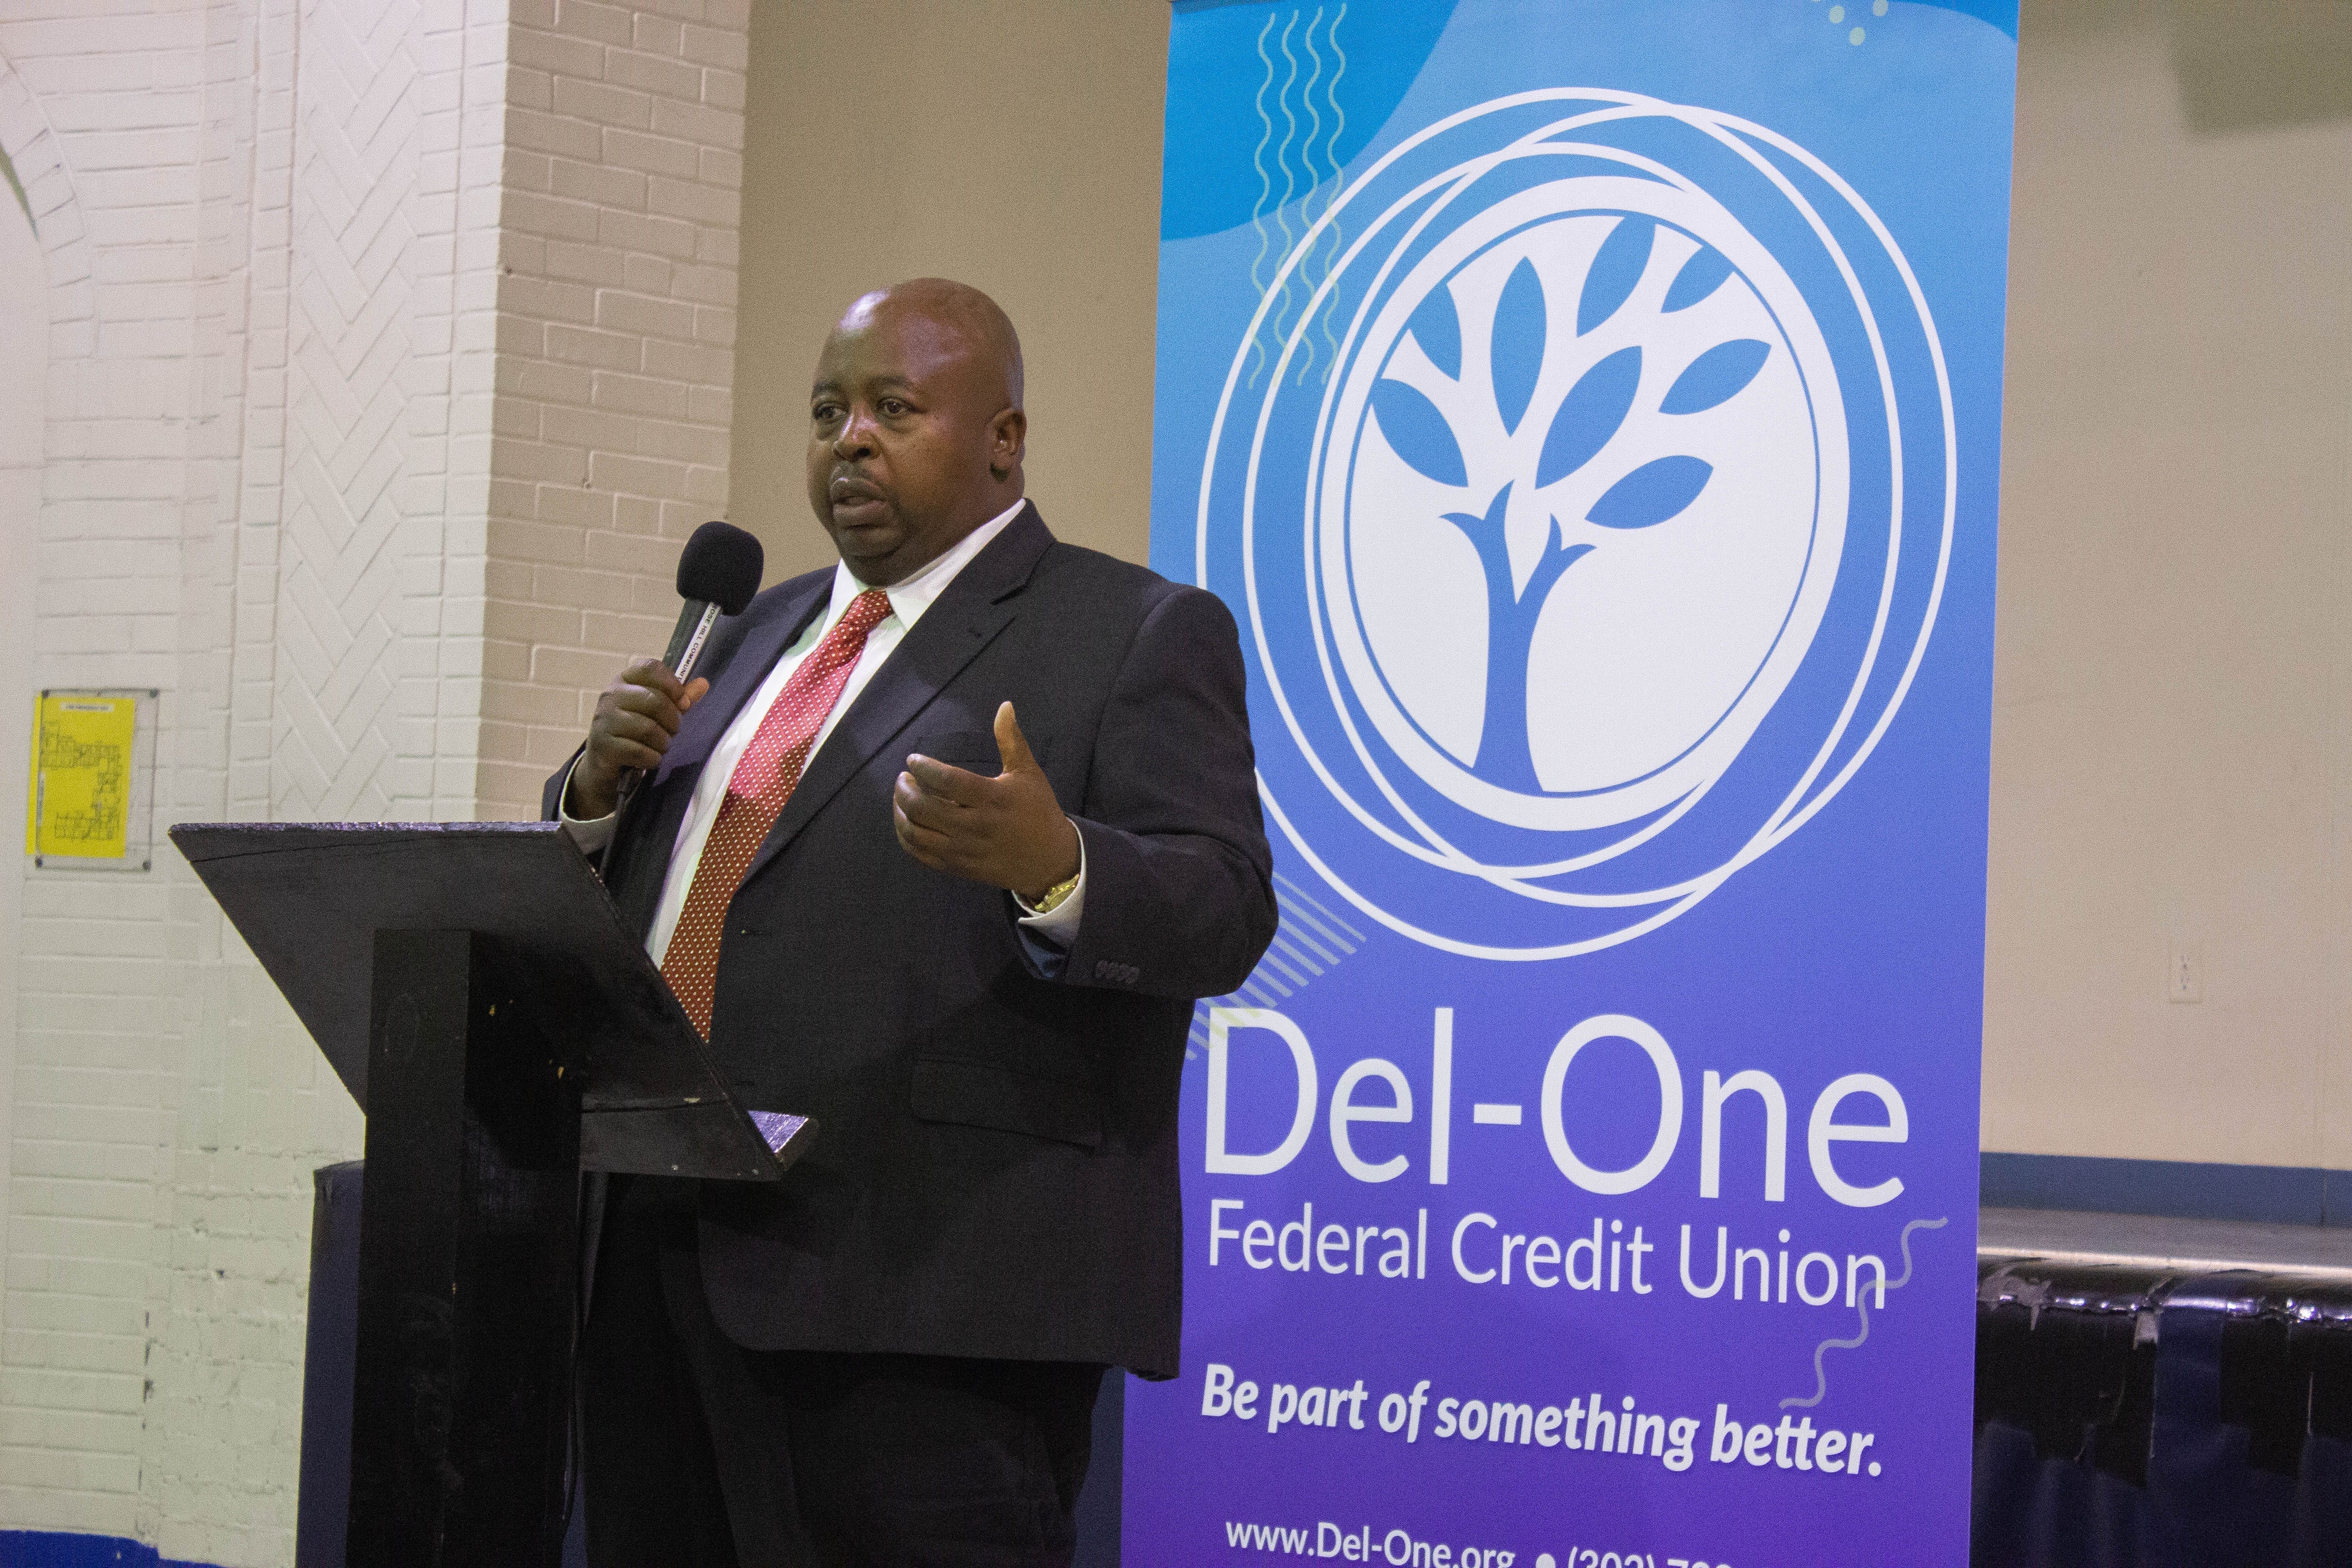 Del-One at the Rose Hill Community Center ceremony